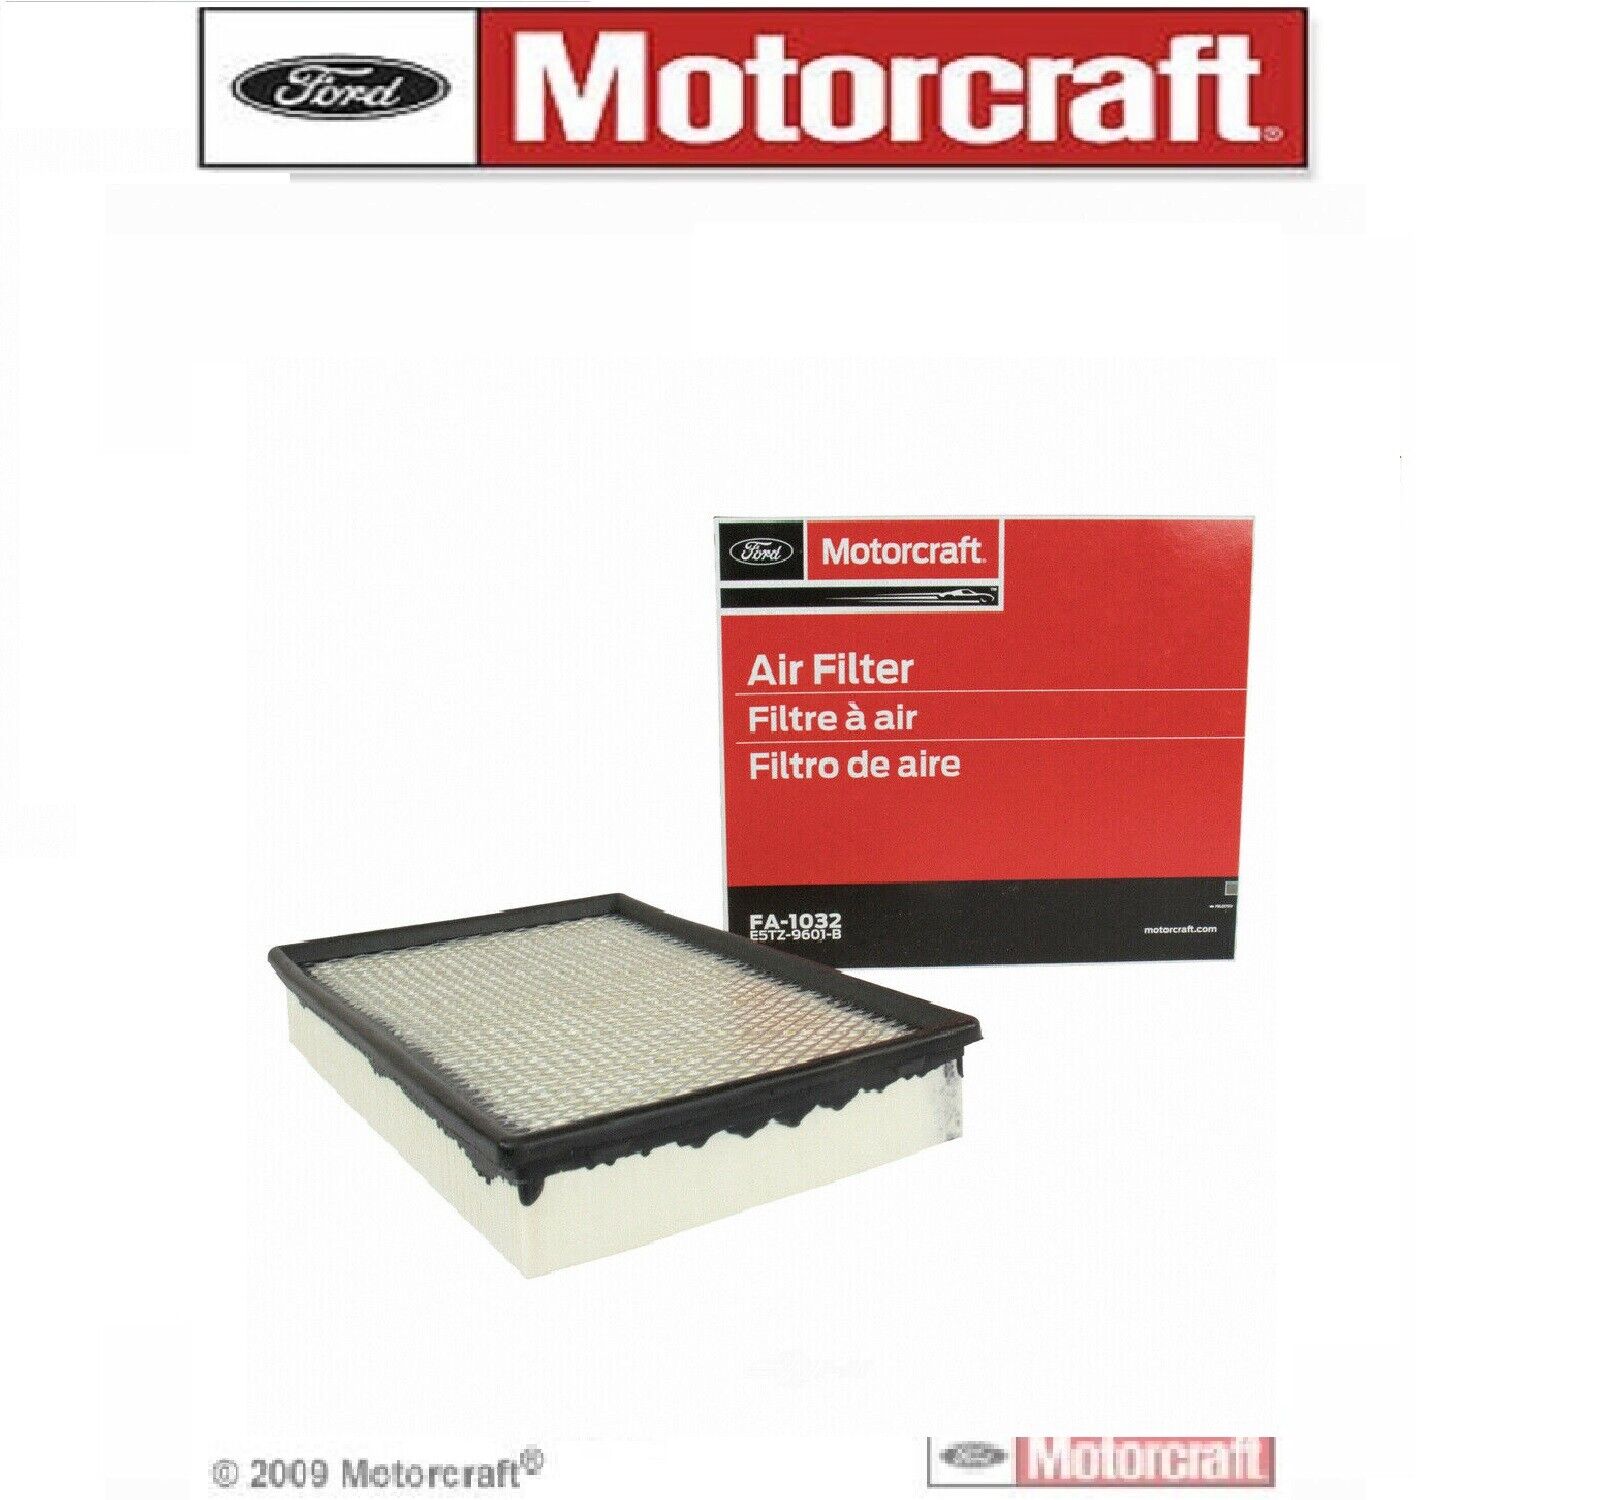 Ford OEM Motorcraft Air Filter For CROWN VICTORIA 1992-2011 4.6L Police Car